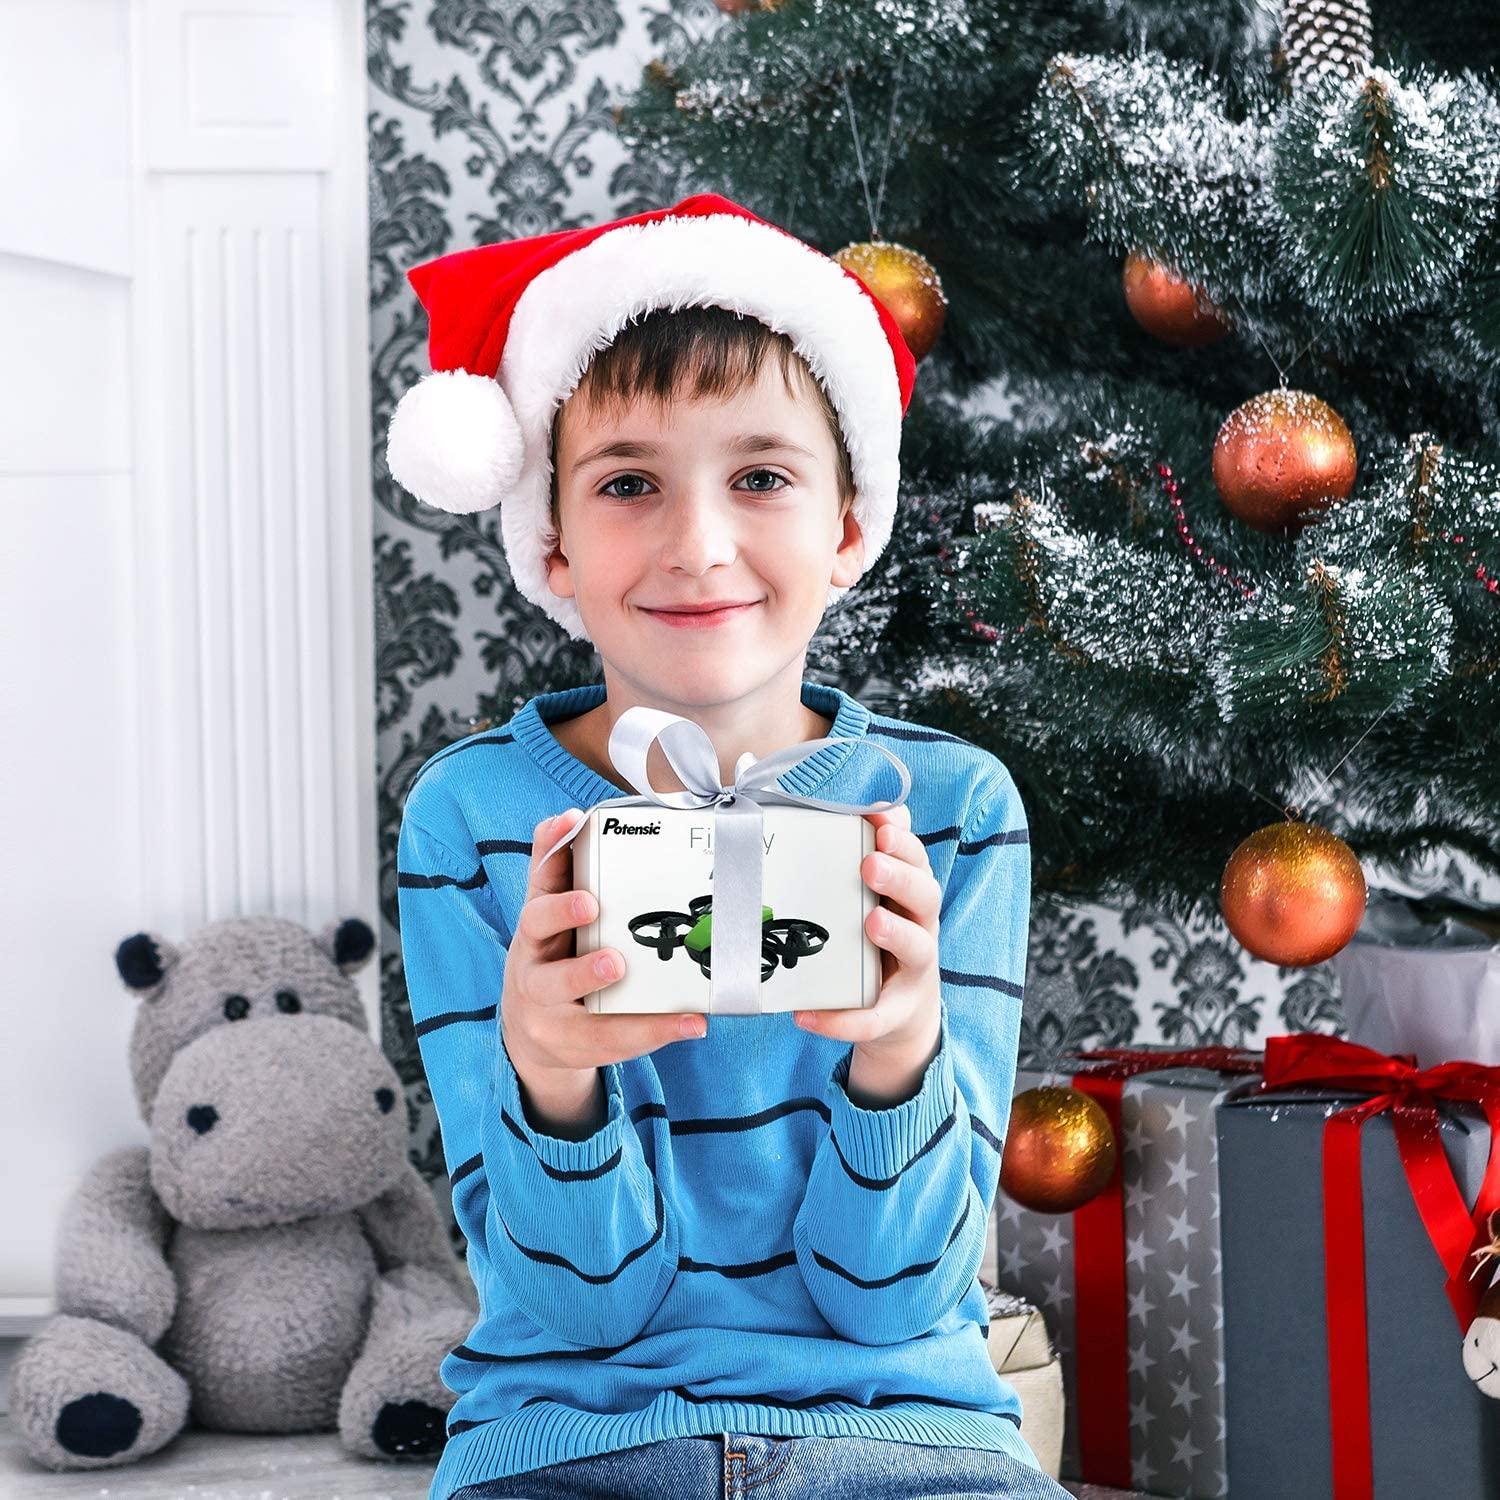 Potensic A20W Mini Drone review: a top budget-priced camera drone for kids